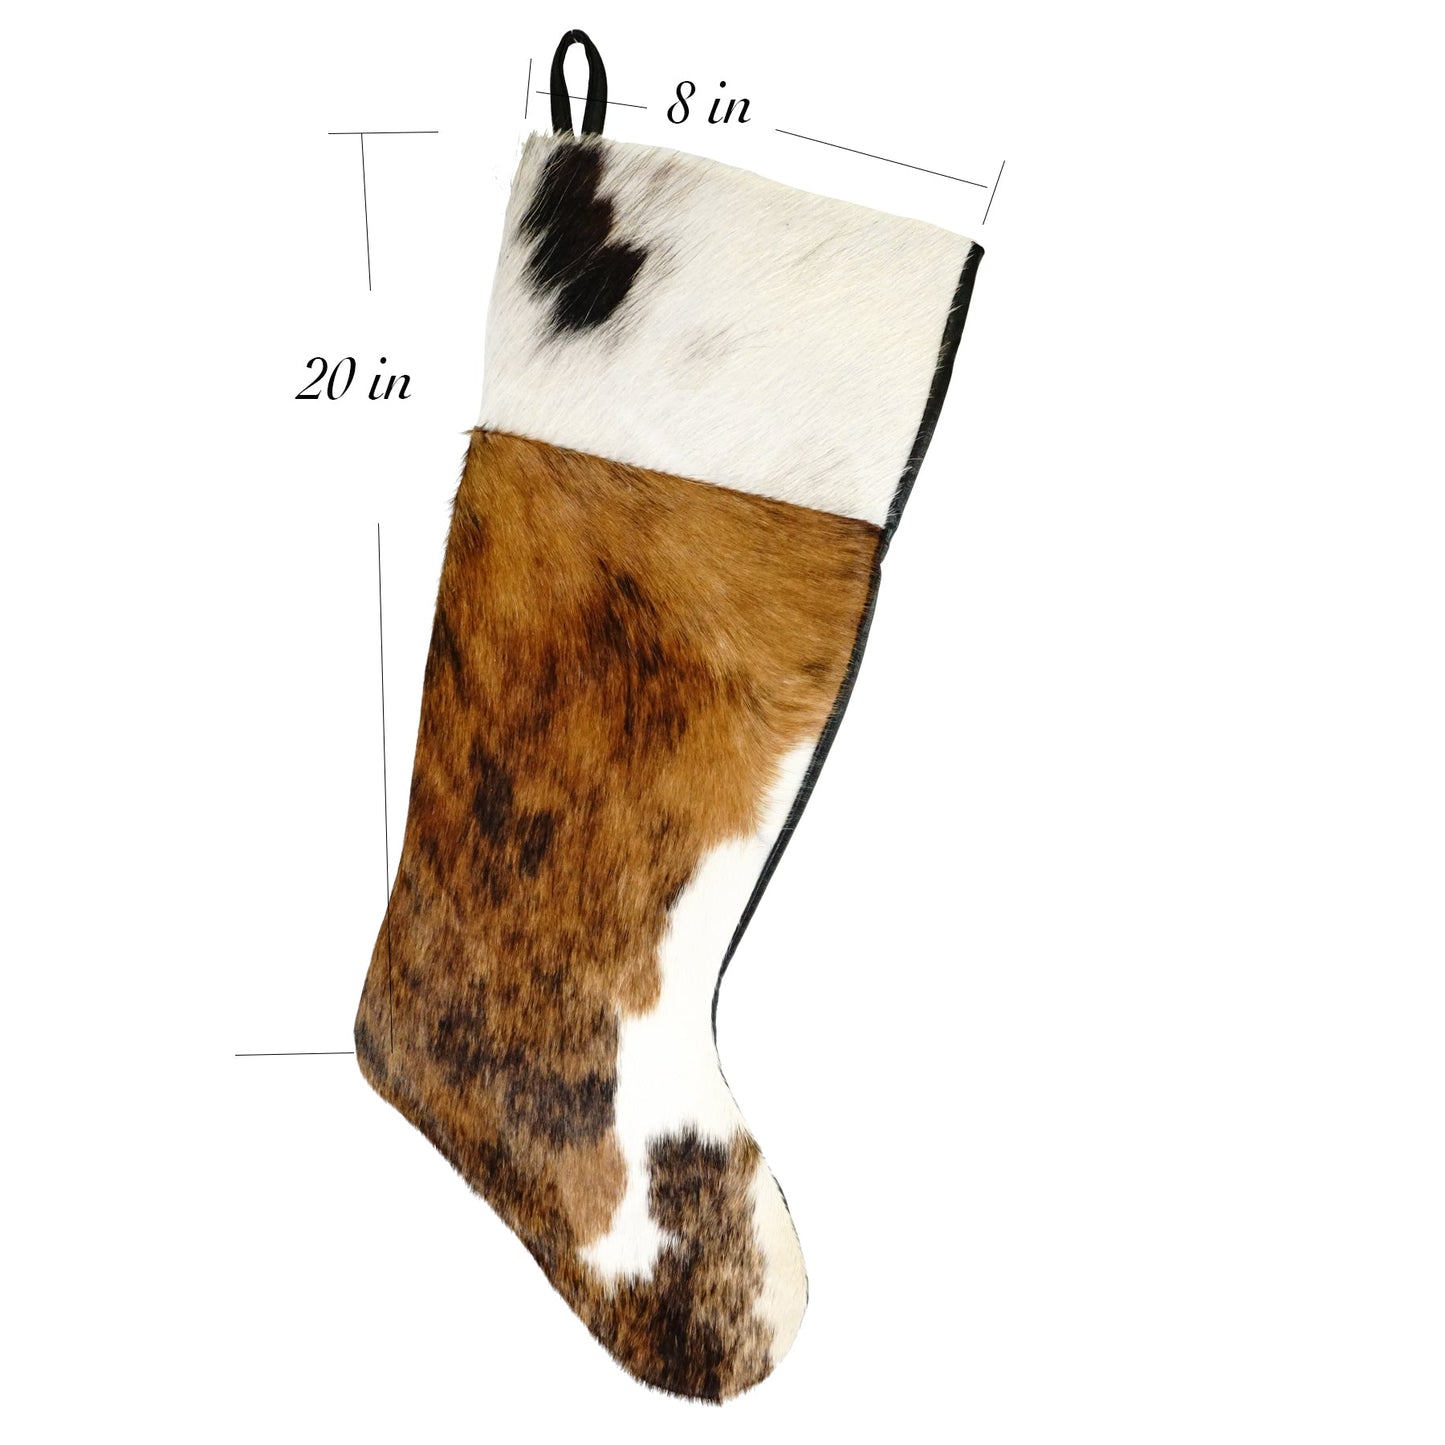 Cowhide Christmas Stocking - Rodeo Cowhide RugsWITHOUT ENGRAVING